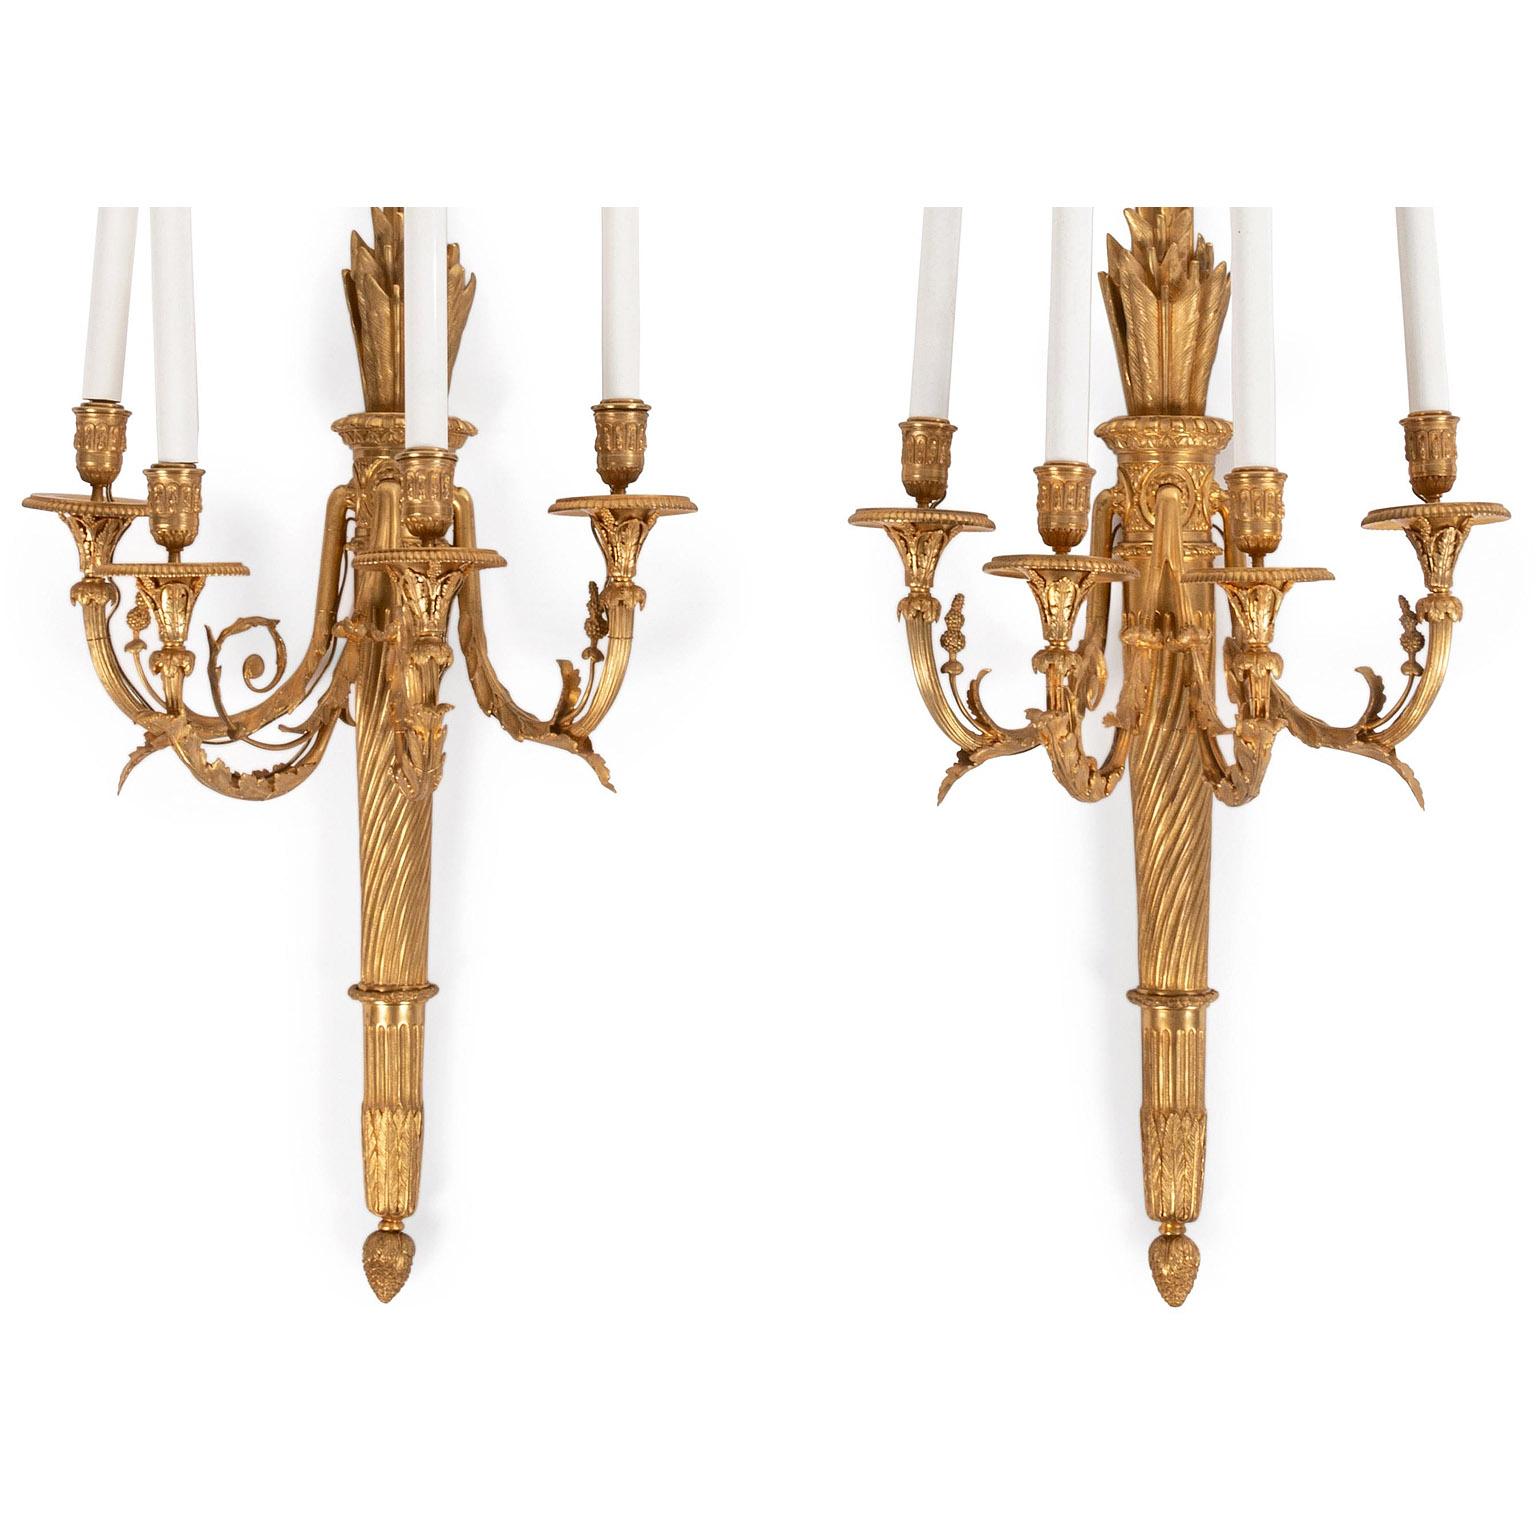 French Fine Pair of 19th Century Louis XVI Style Gilt Bronze 4-Light Wall Sconces